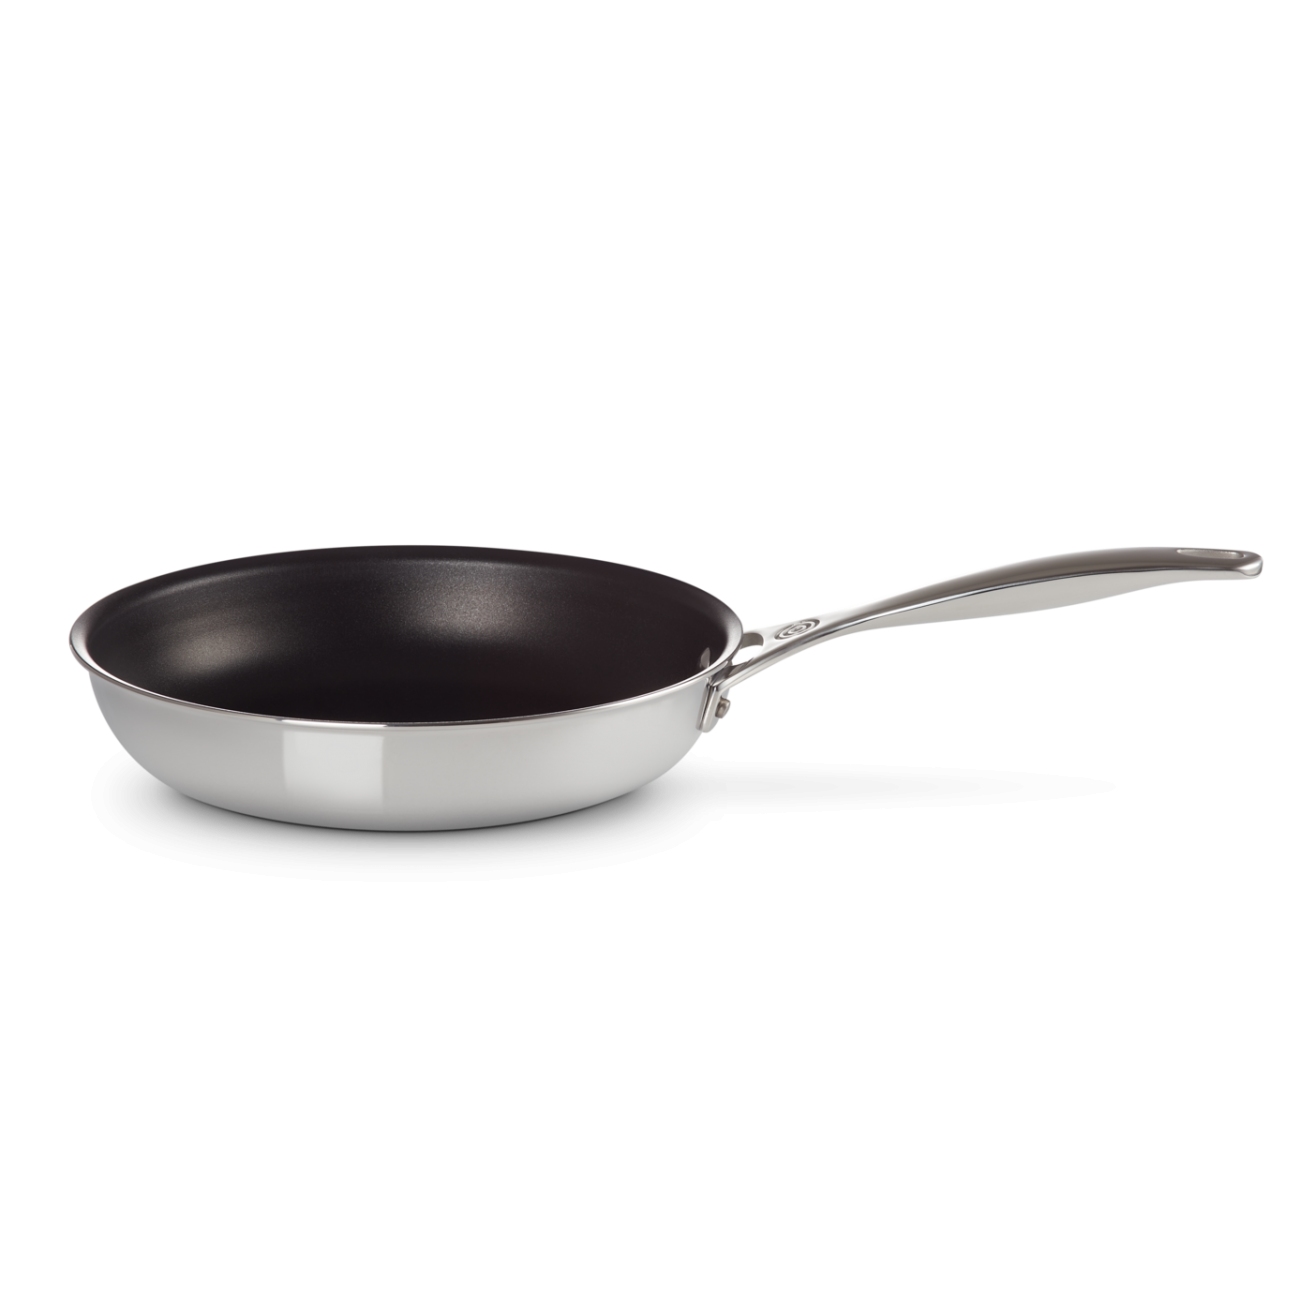 https://www.tattahome.com/53120-large_default/le-creuset-signature-stainless-steel-non-stick-tall-pan-32.jpg